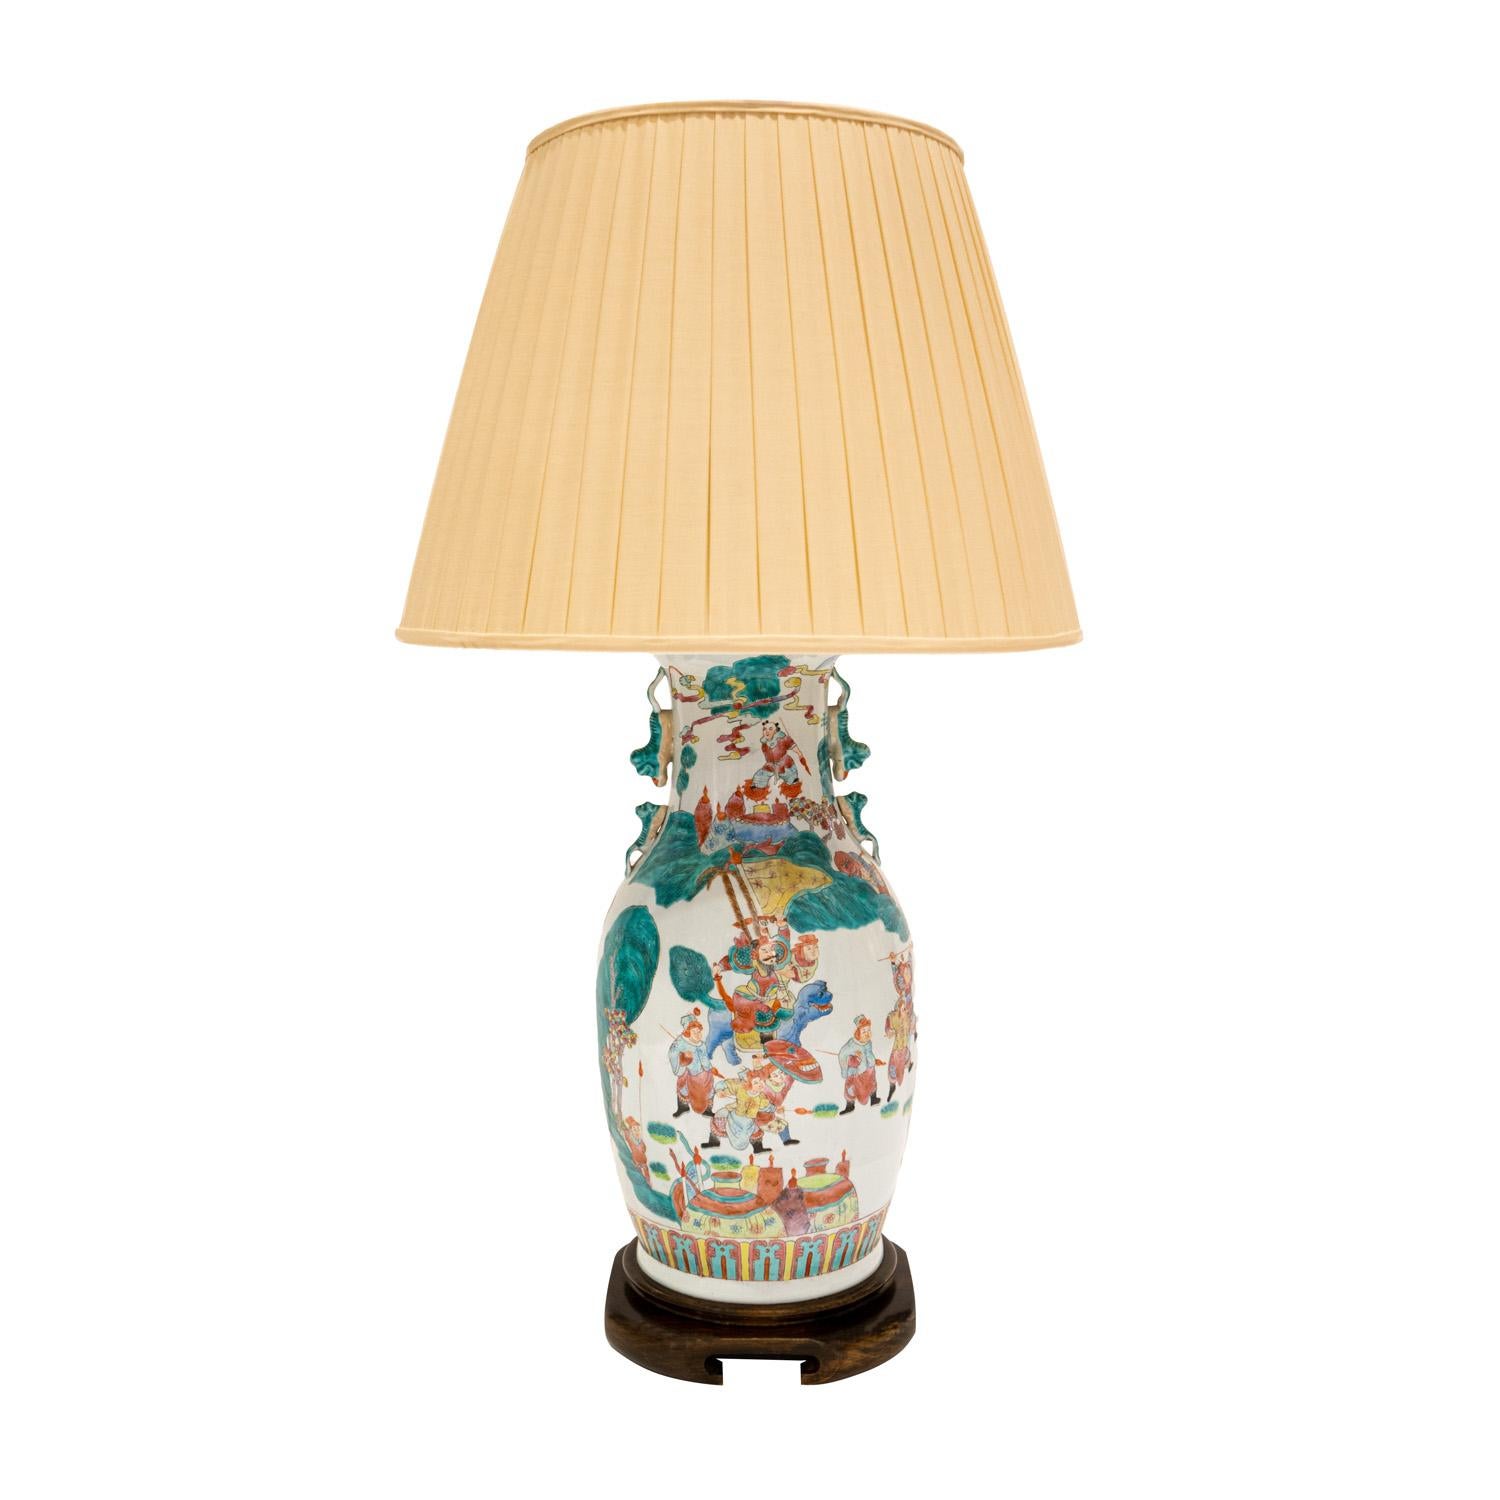 Exceptional studio made porcelain table lamp with hand-painted figural and geometric decoration on a carved wood base, China 1960's. The artisanship of this lamp is superb.  This lamp has 3 bulbs - 1 faces upward and 2 are on the sides.  It’s a